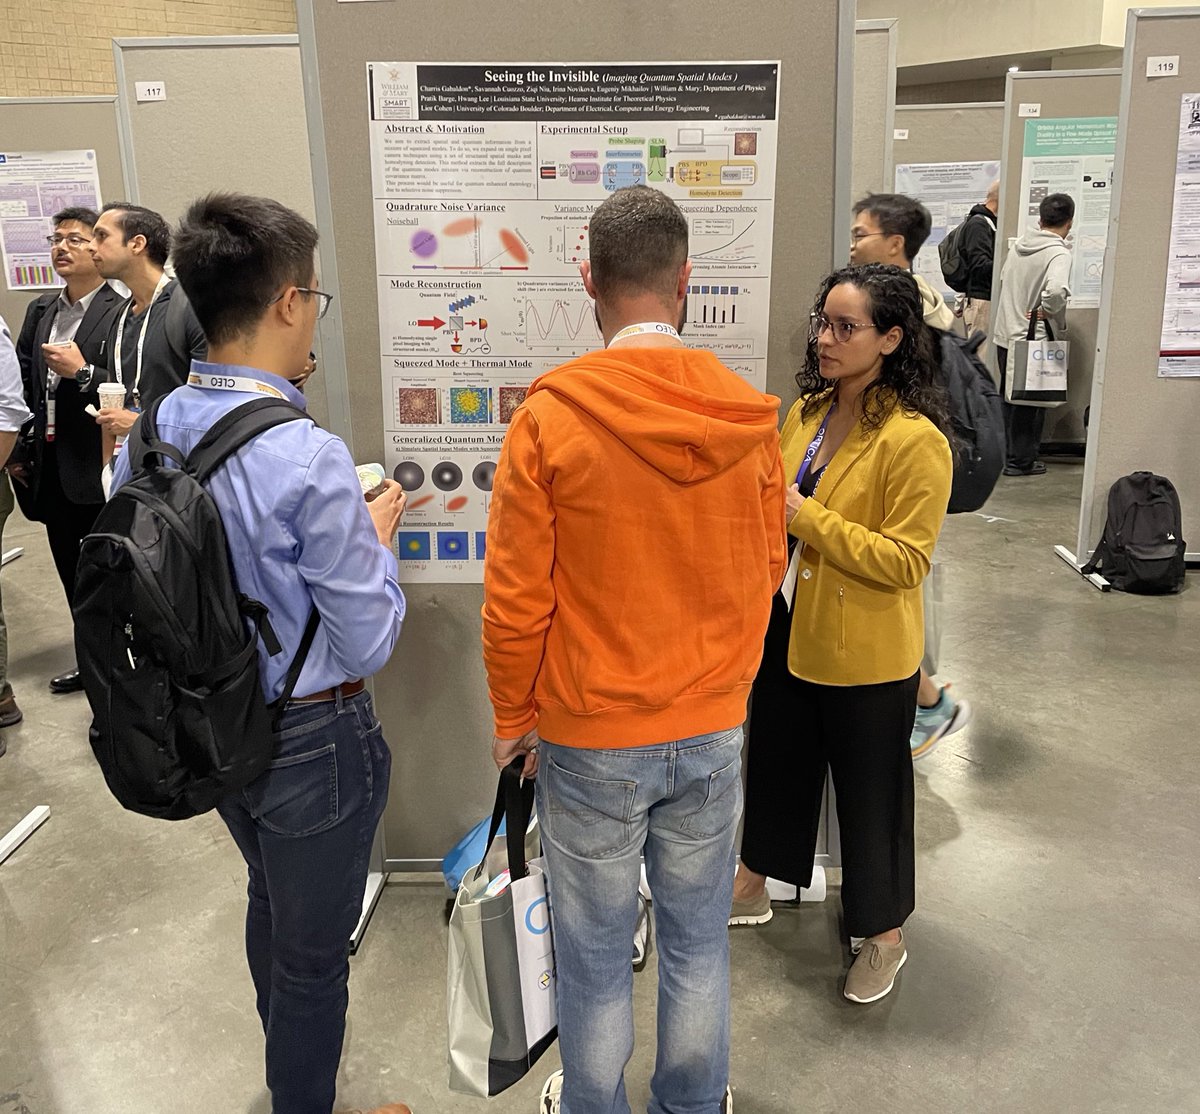 It was empowering today at #CLEO2024 to see so many women and the future of the photonics community presenting their scientific work and posters. #WomenInSTEM #STEMinists #RepresentationMatters